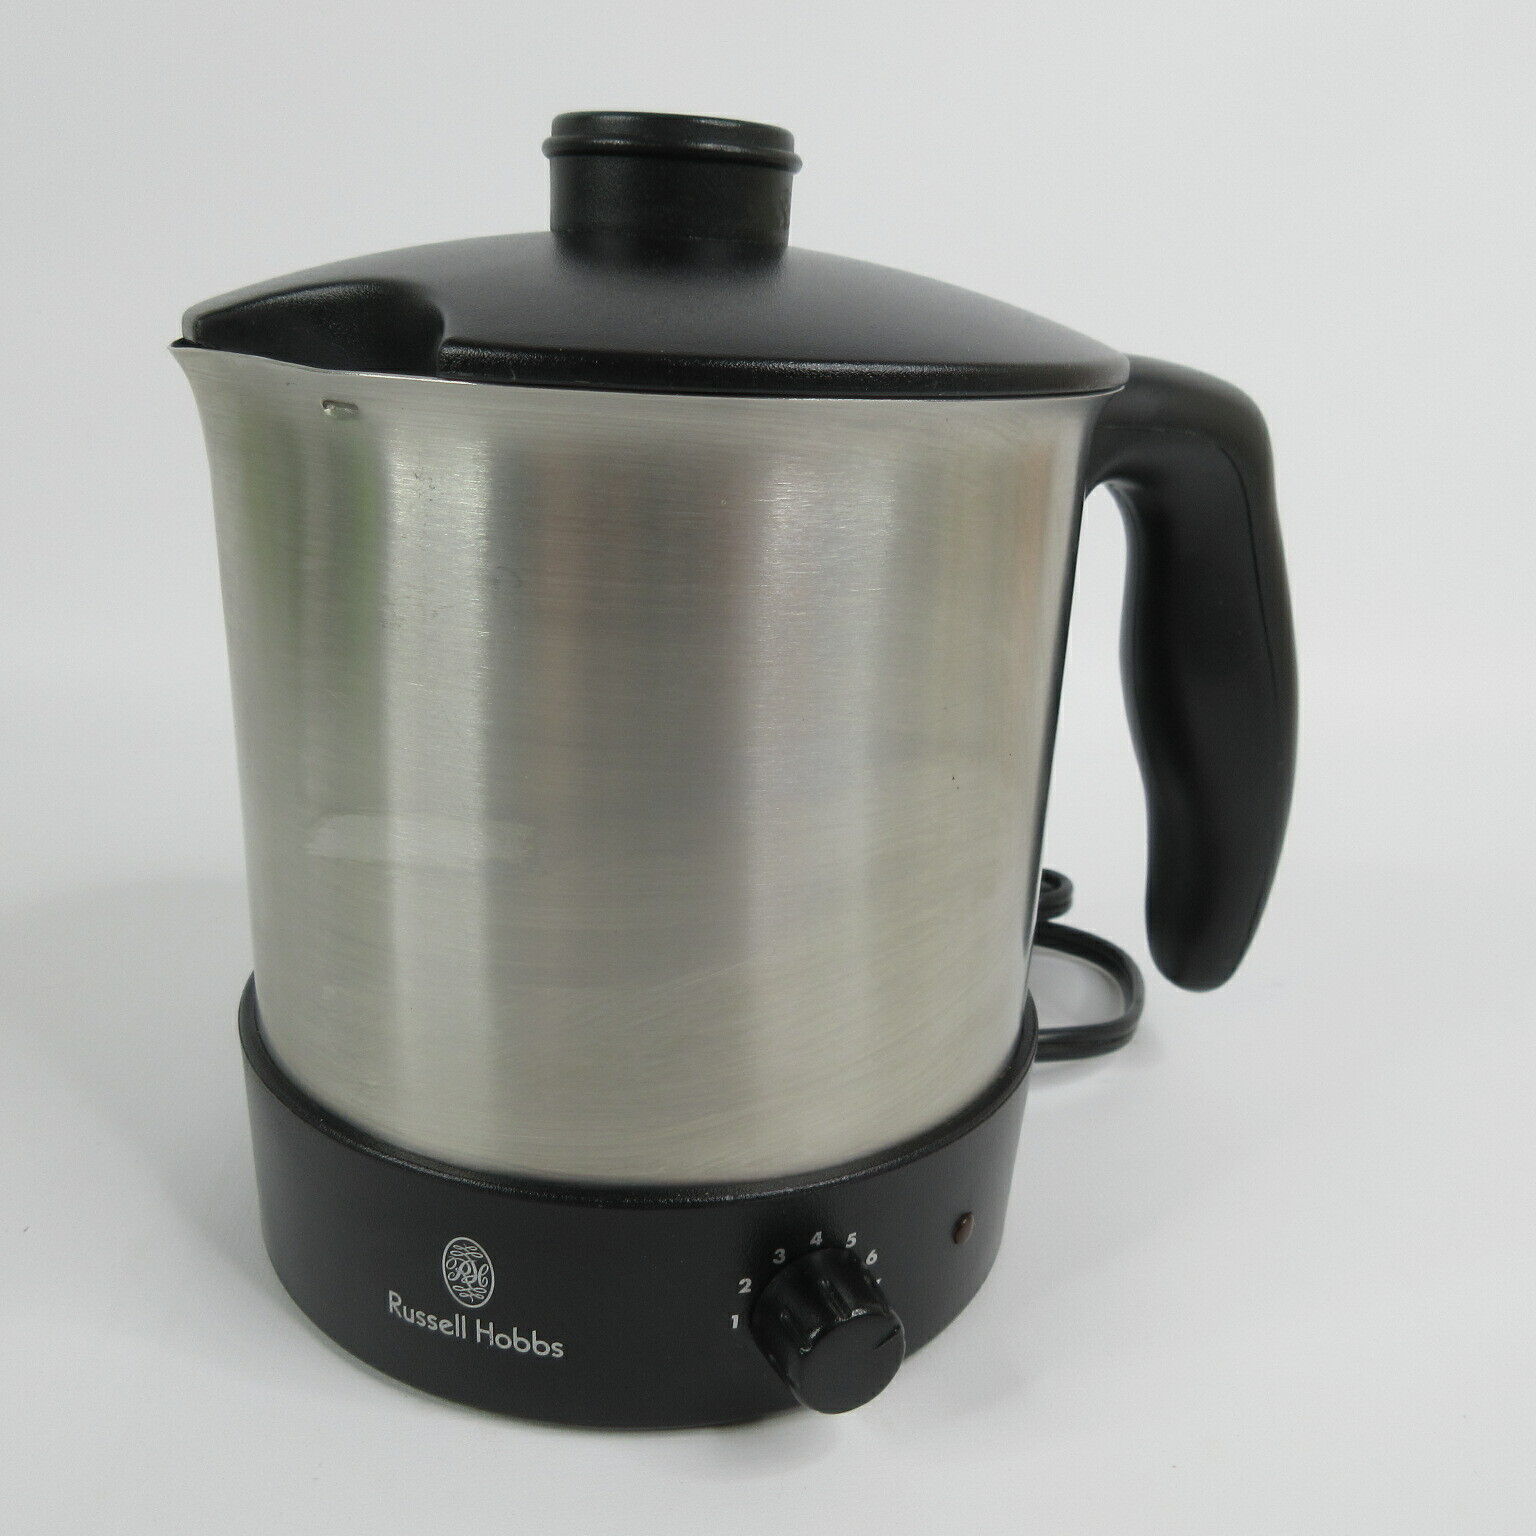 Russell Hobbs Hot Pot RHHP4447 brushed stainless with black plastic handle lid